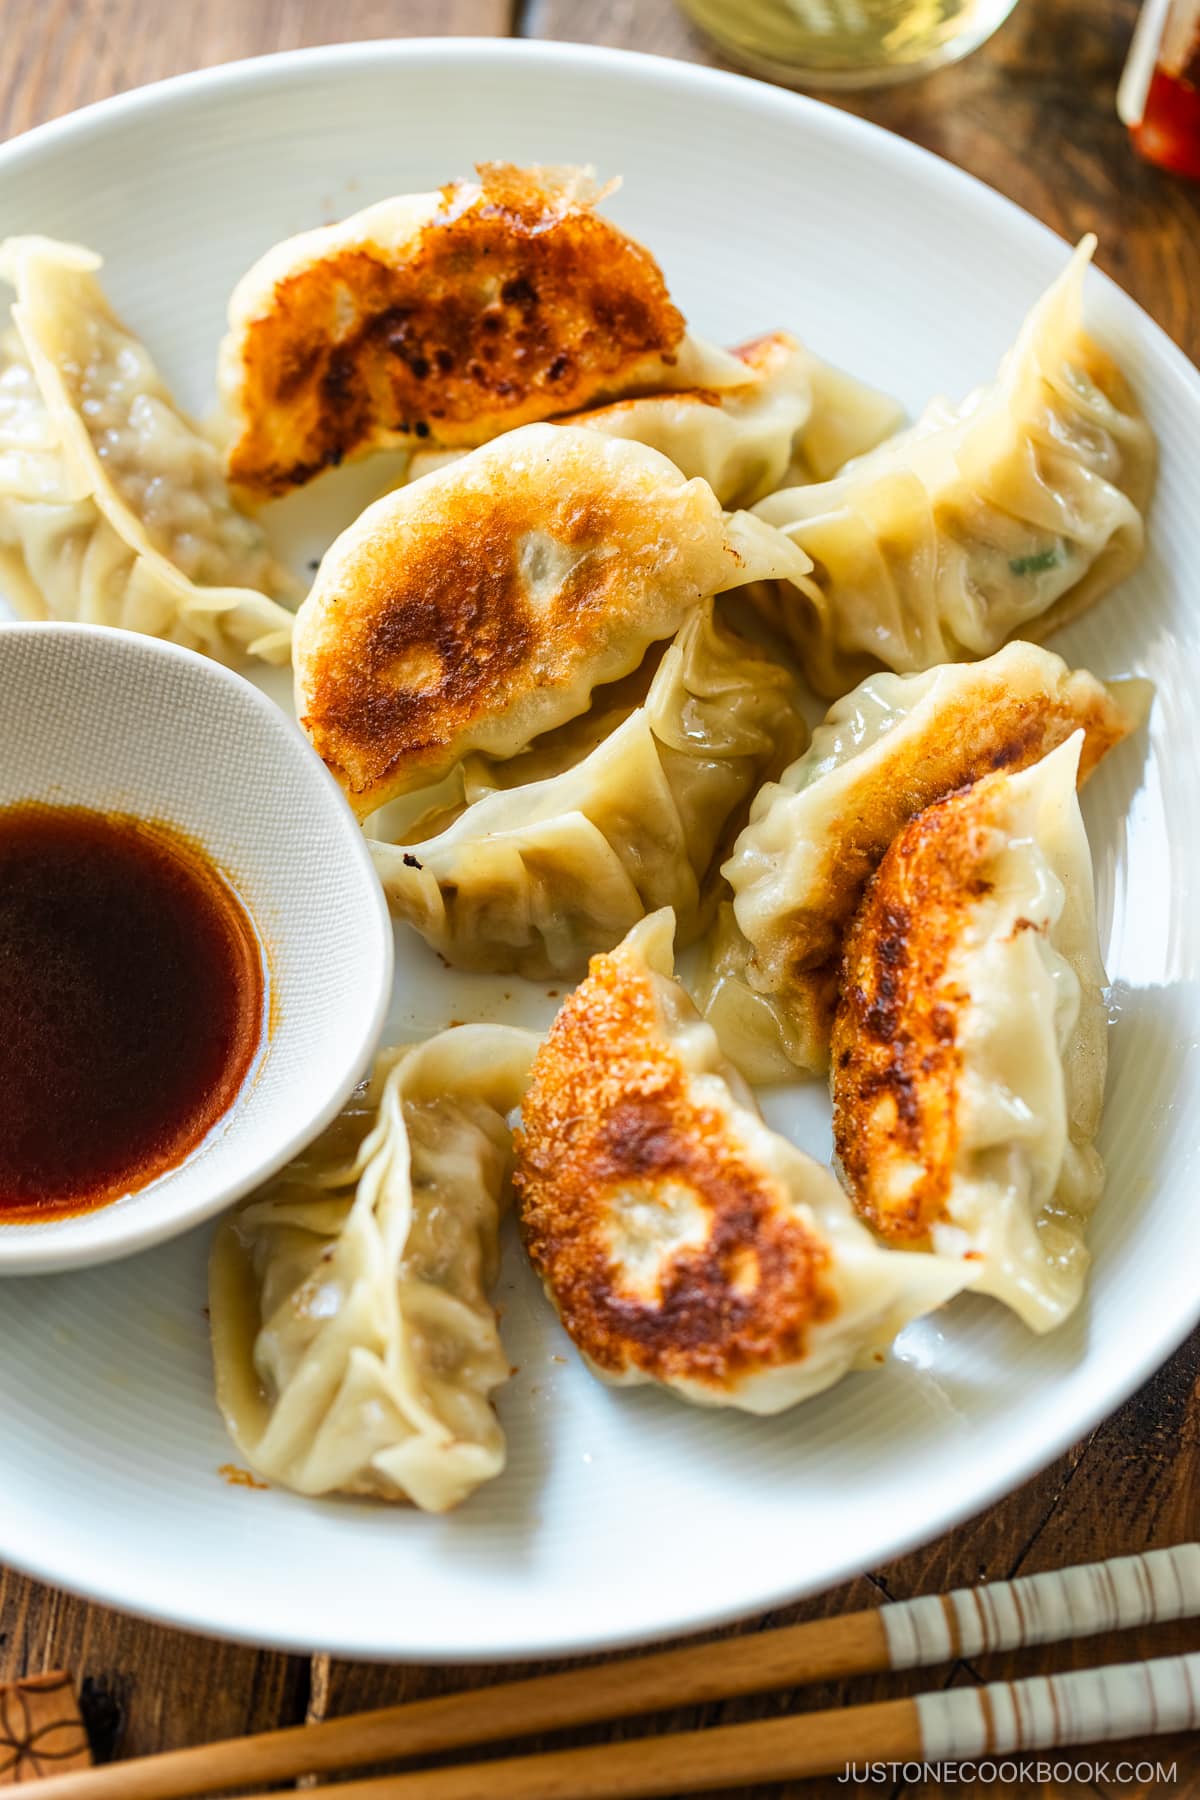 A round plate containing gyoza (Japanese potstickers or pan-fried dumplings) with a small plate of dipping sauce made with soy sauce, vinegar, and Japanese chili oil.